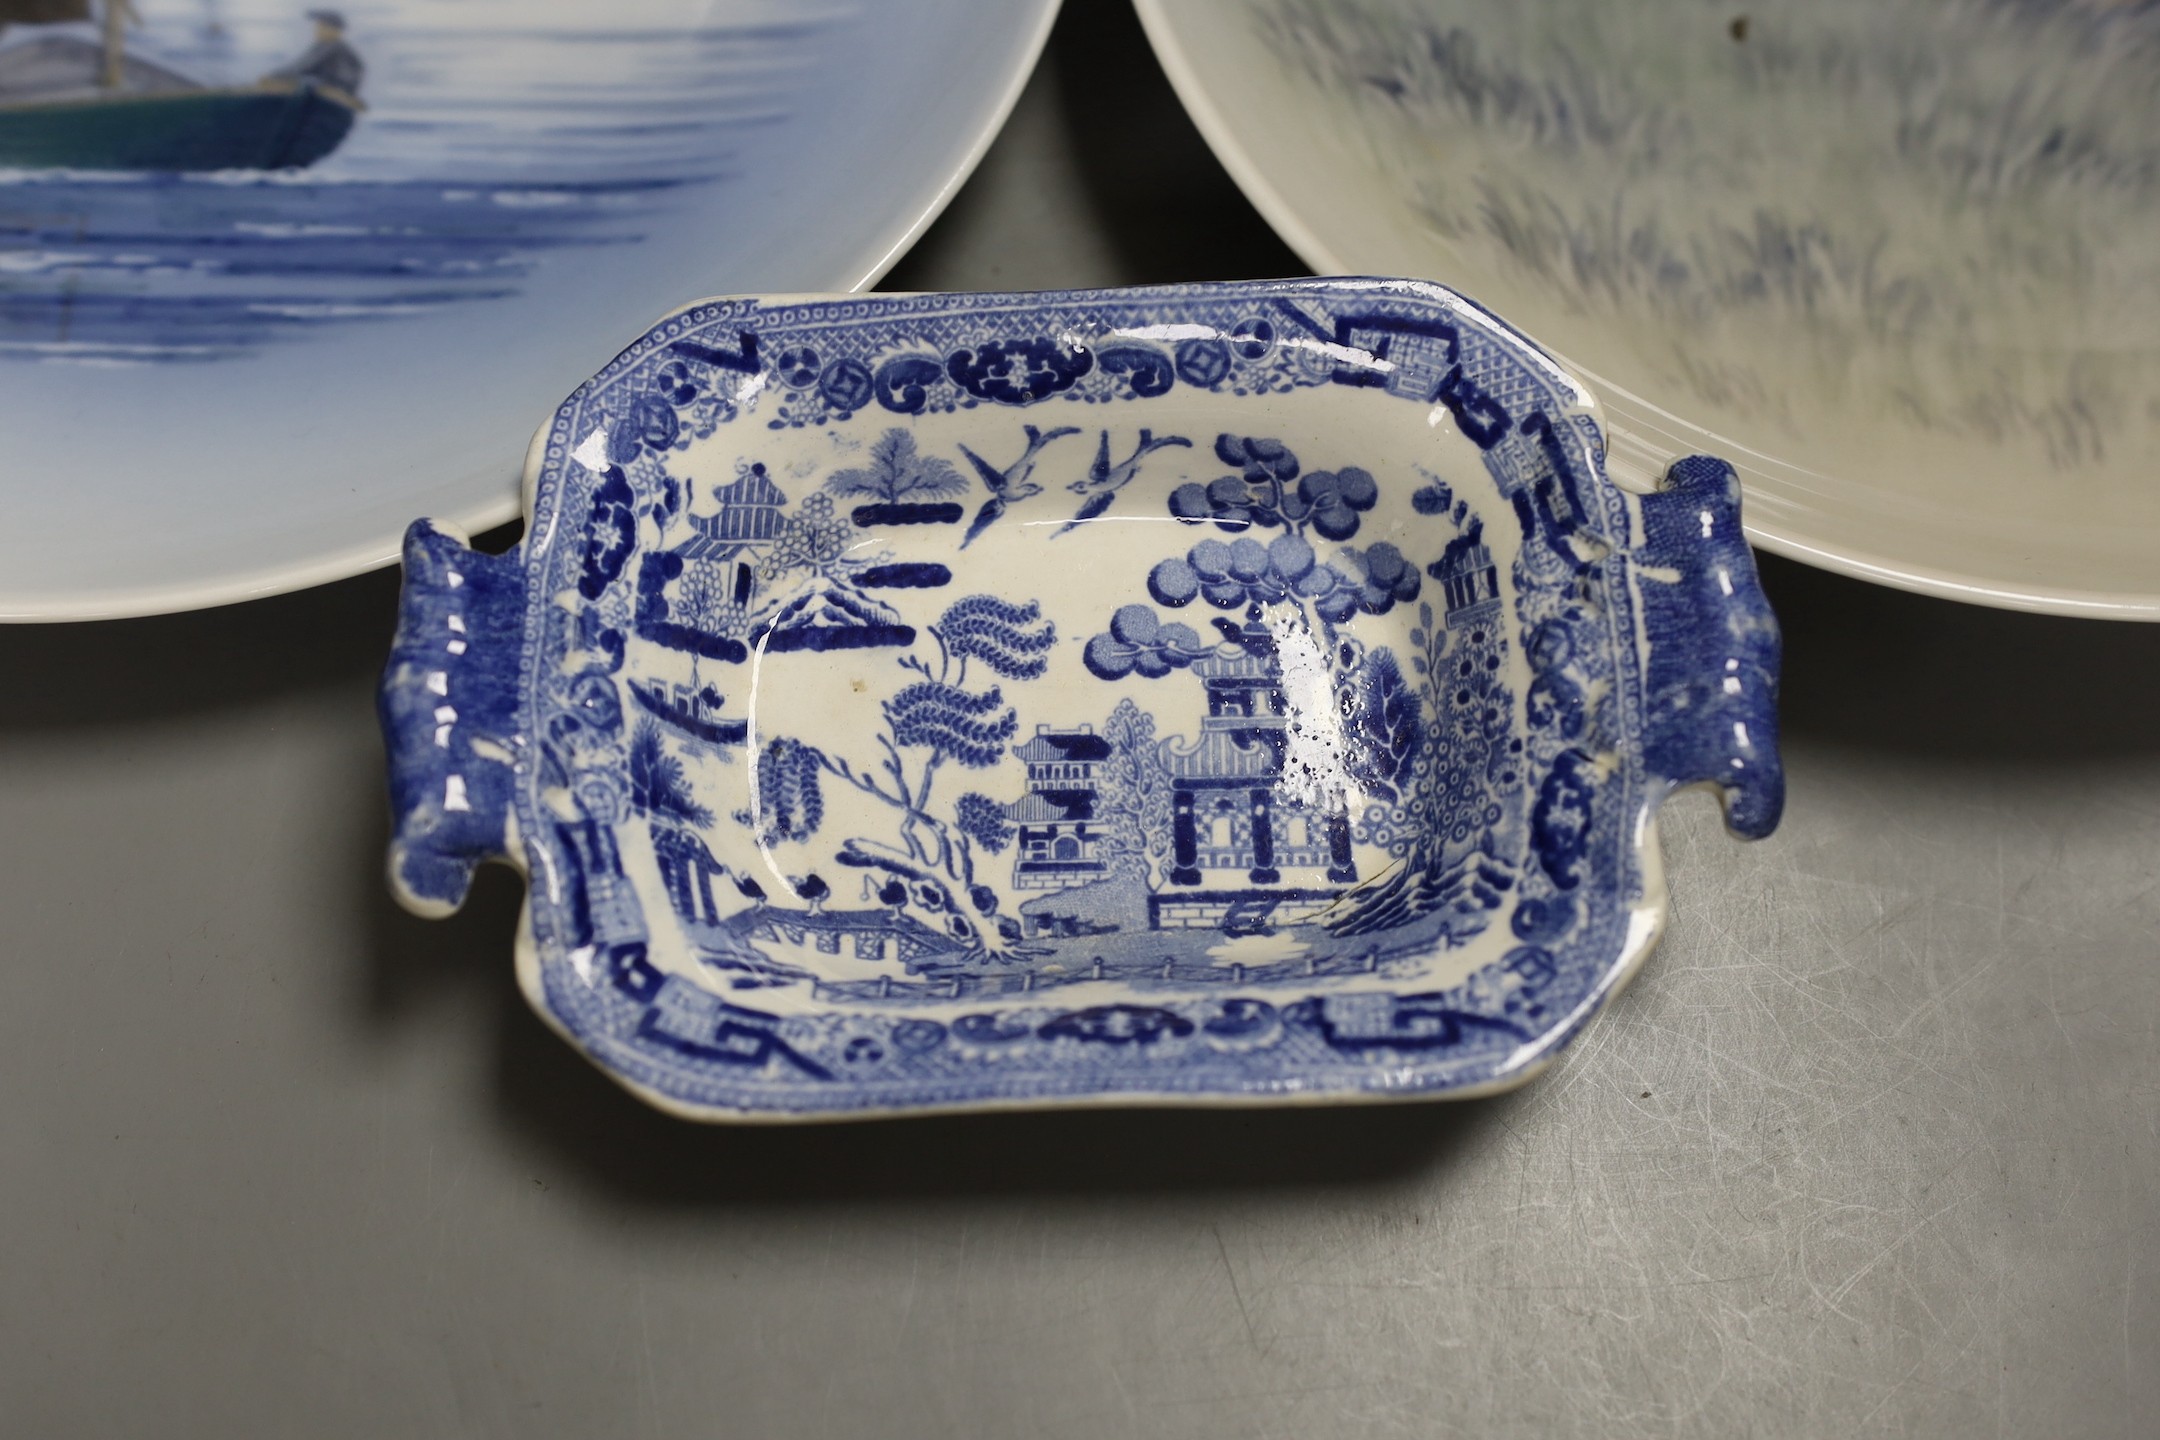 A pair of Royal Copenhagen plates, a pair of German pottery ewers a blue and white dish and pickle dish, plates 25 cms diameter.